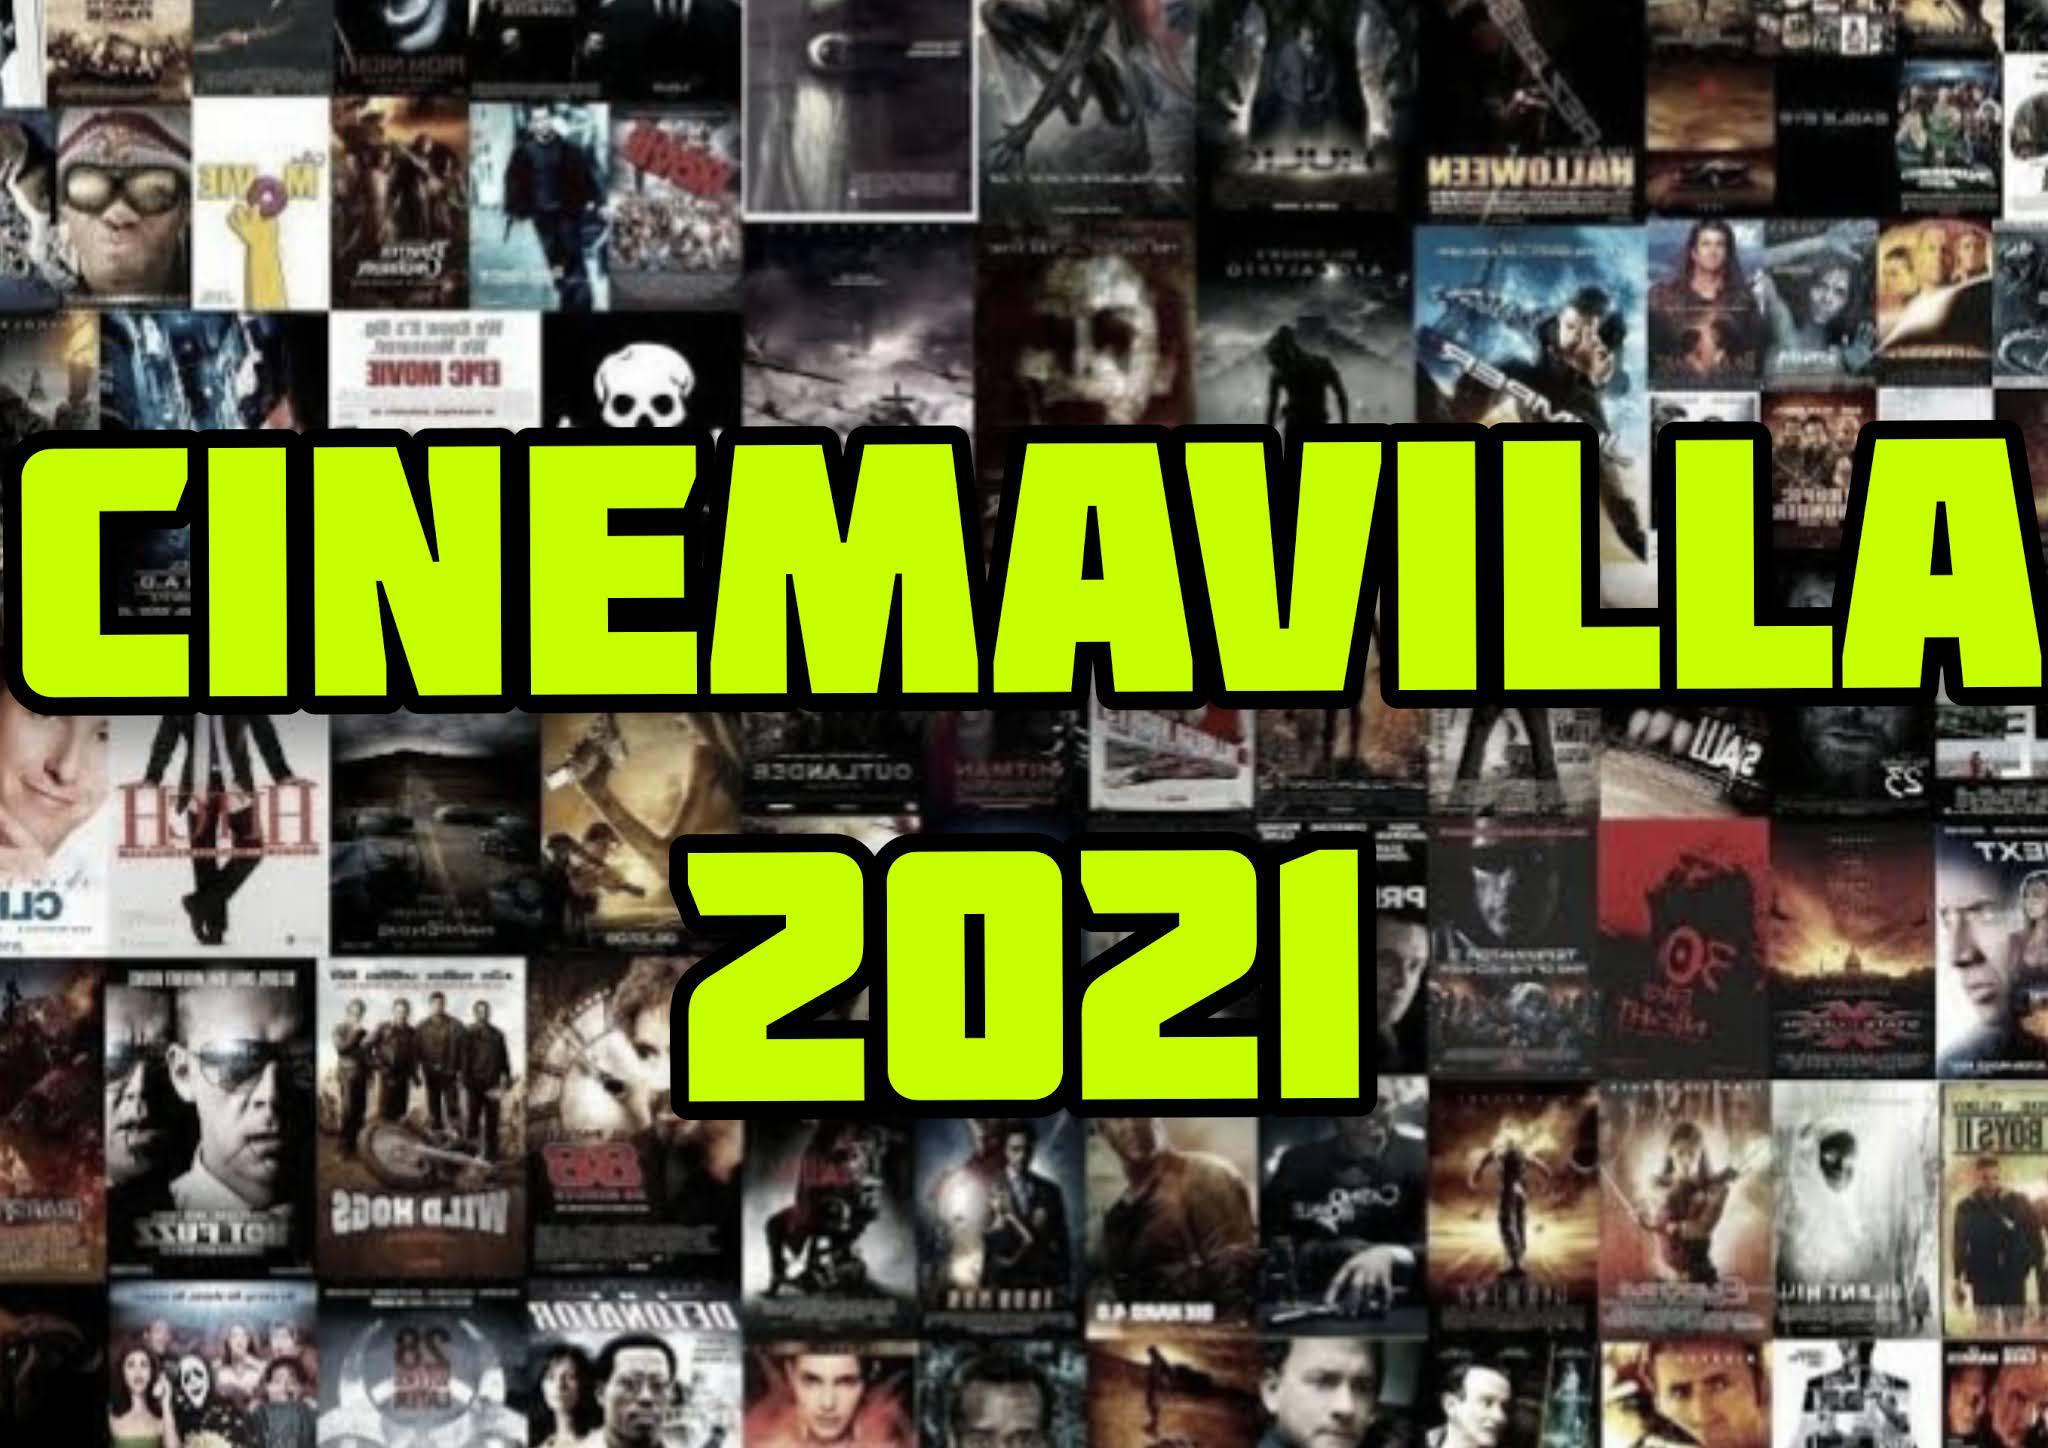 Readerscook Cinemavilla 2021 Cinemavilla Website Link And Movie Download .movie and a super hit tamil telegu dubbed movie charlie this is a good movie but this pircy website leaked online this full movie download file in his server so don't download. readerscook